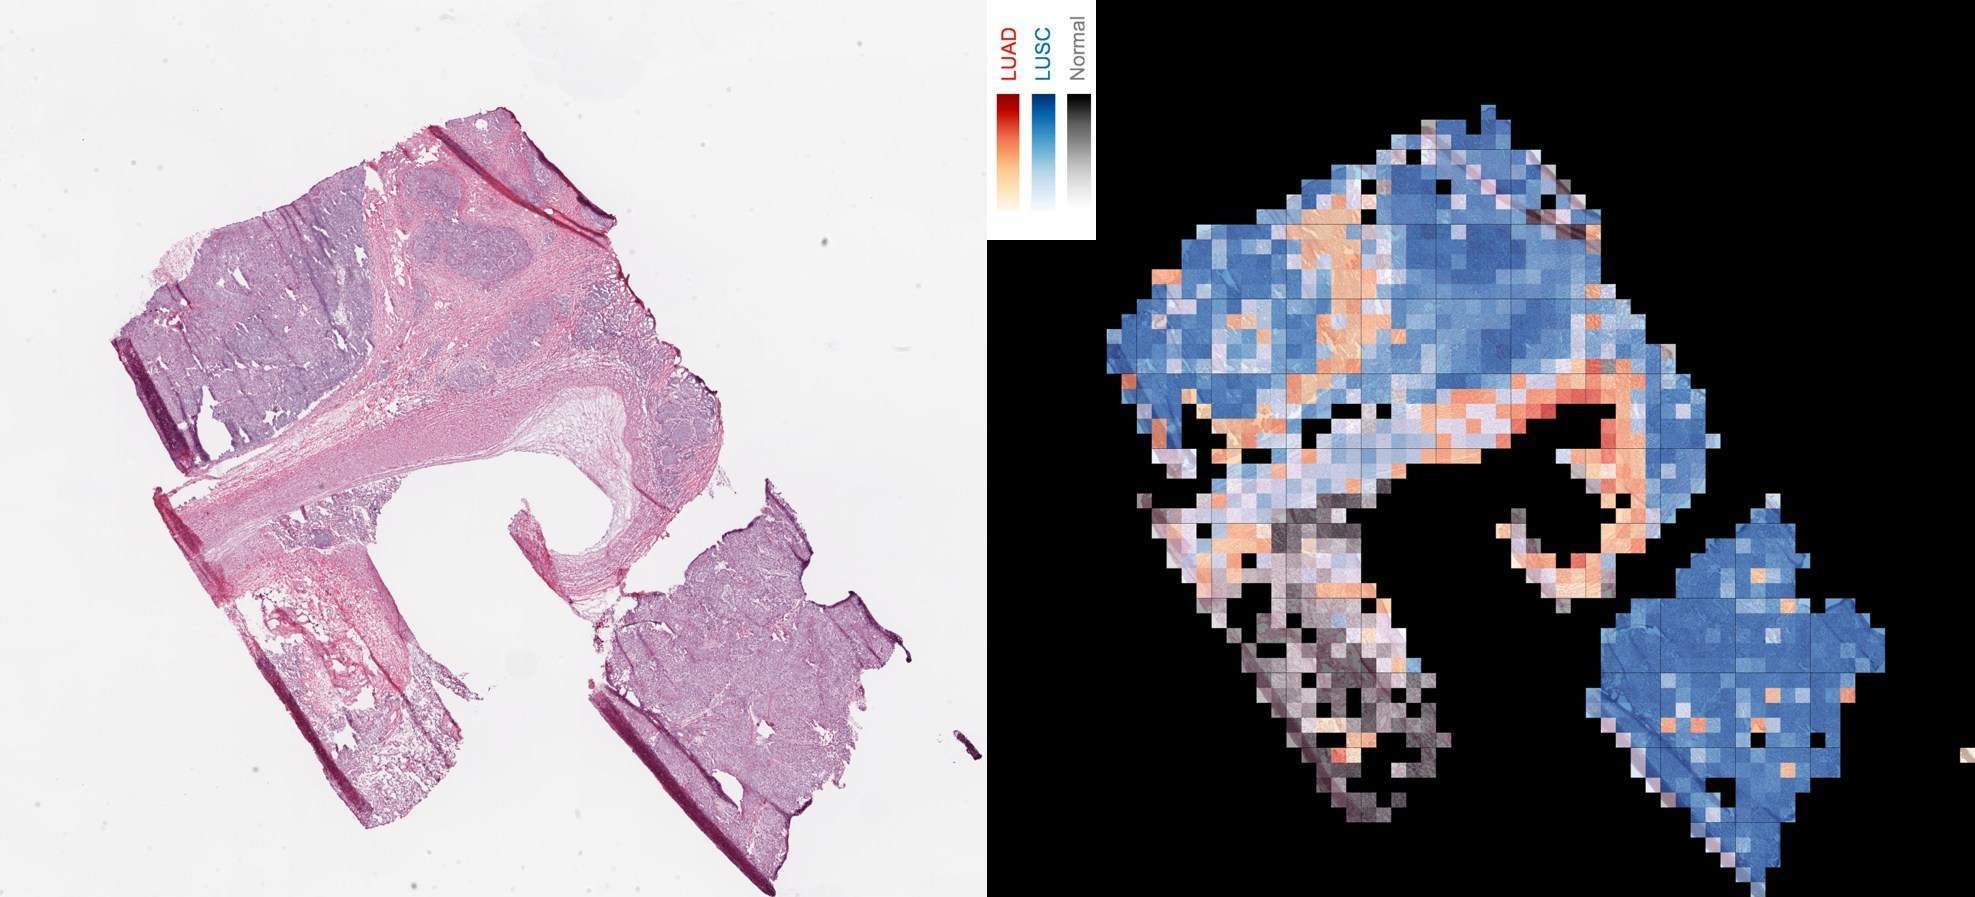 Study shows new computer program can analyze images of patients’ lung tumors